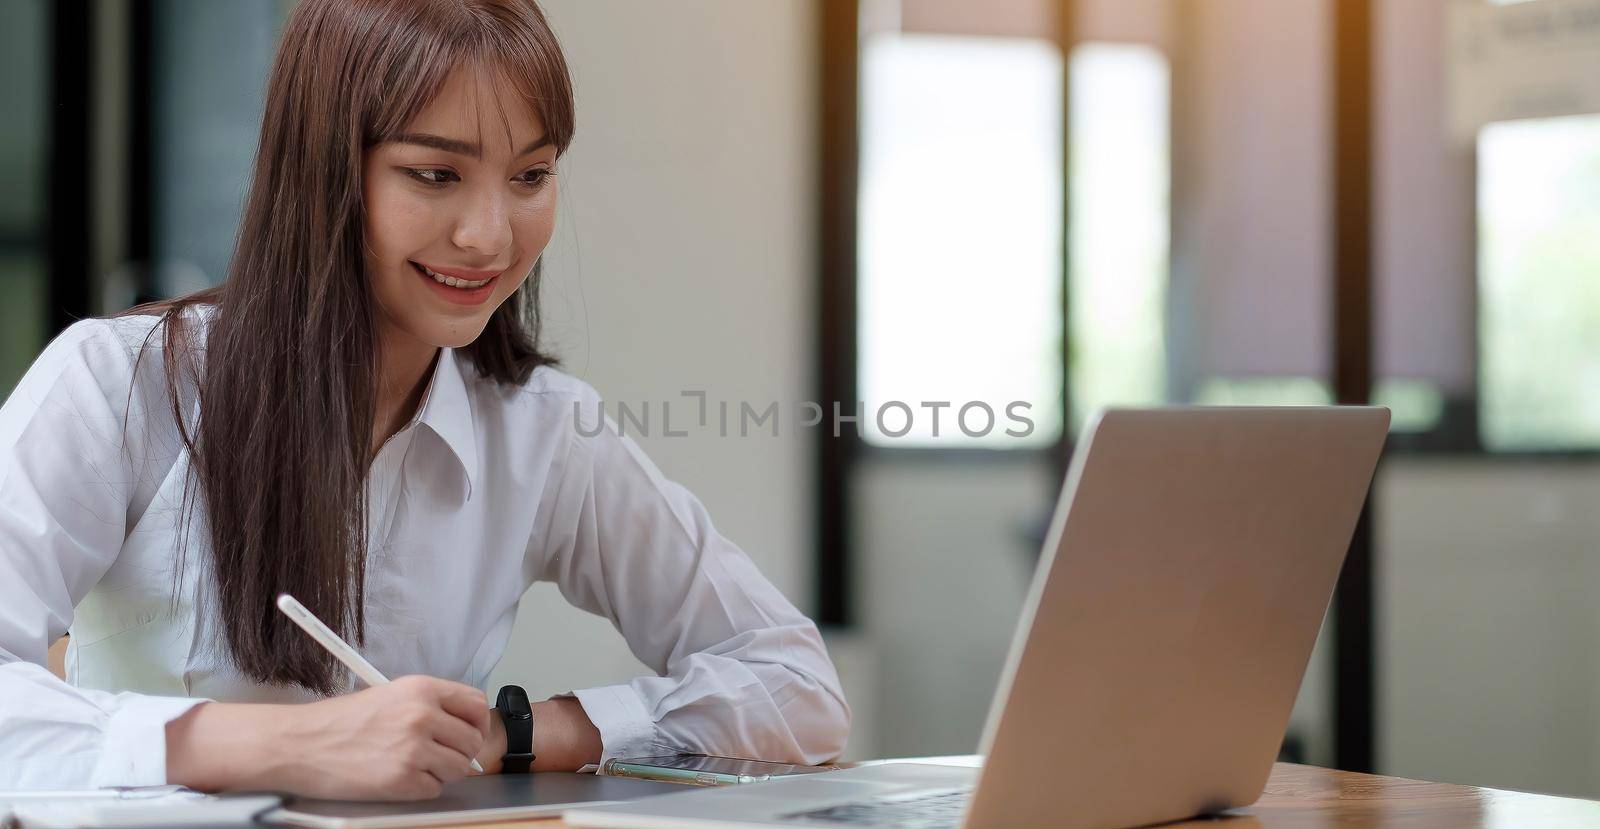 A young, cheerful girl in a white shirt smiles, smiling toothily writing down notes holding training for students to be executives at laptop desktop table